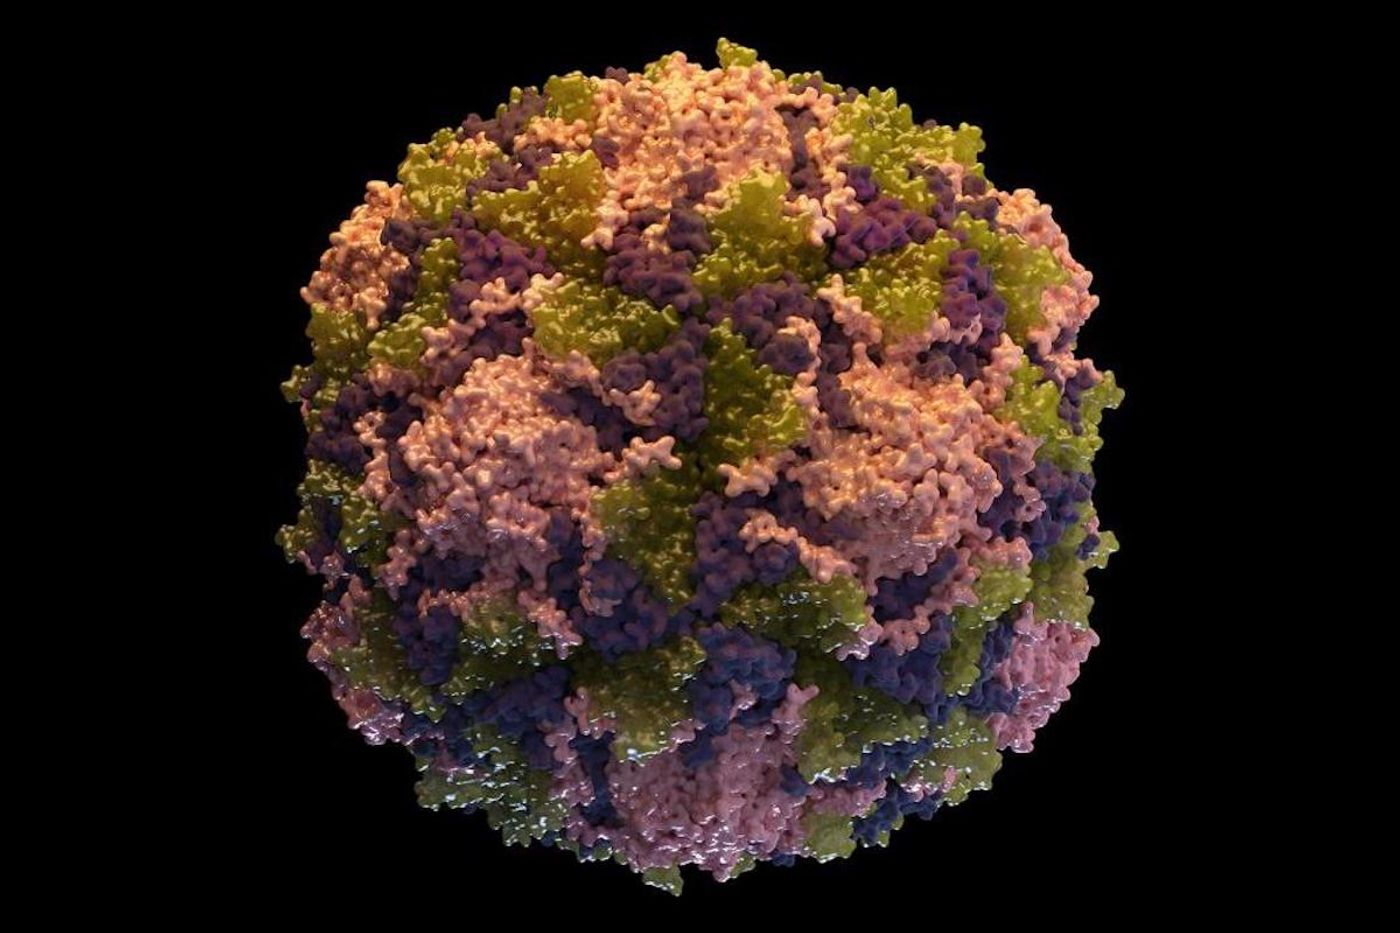 An illustration of a poliovirus particle / Credit: CDC/ Sarah Poser / Photo Credit: Meredith Boyter Newlove, M.S.